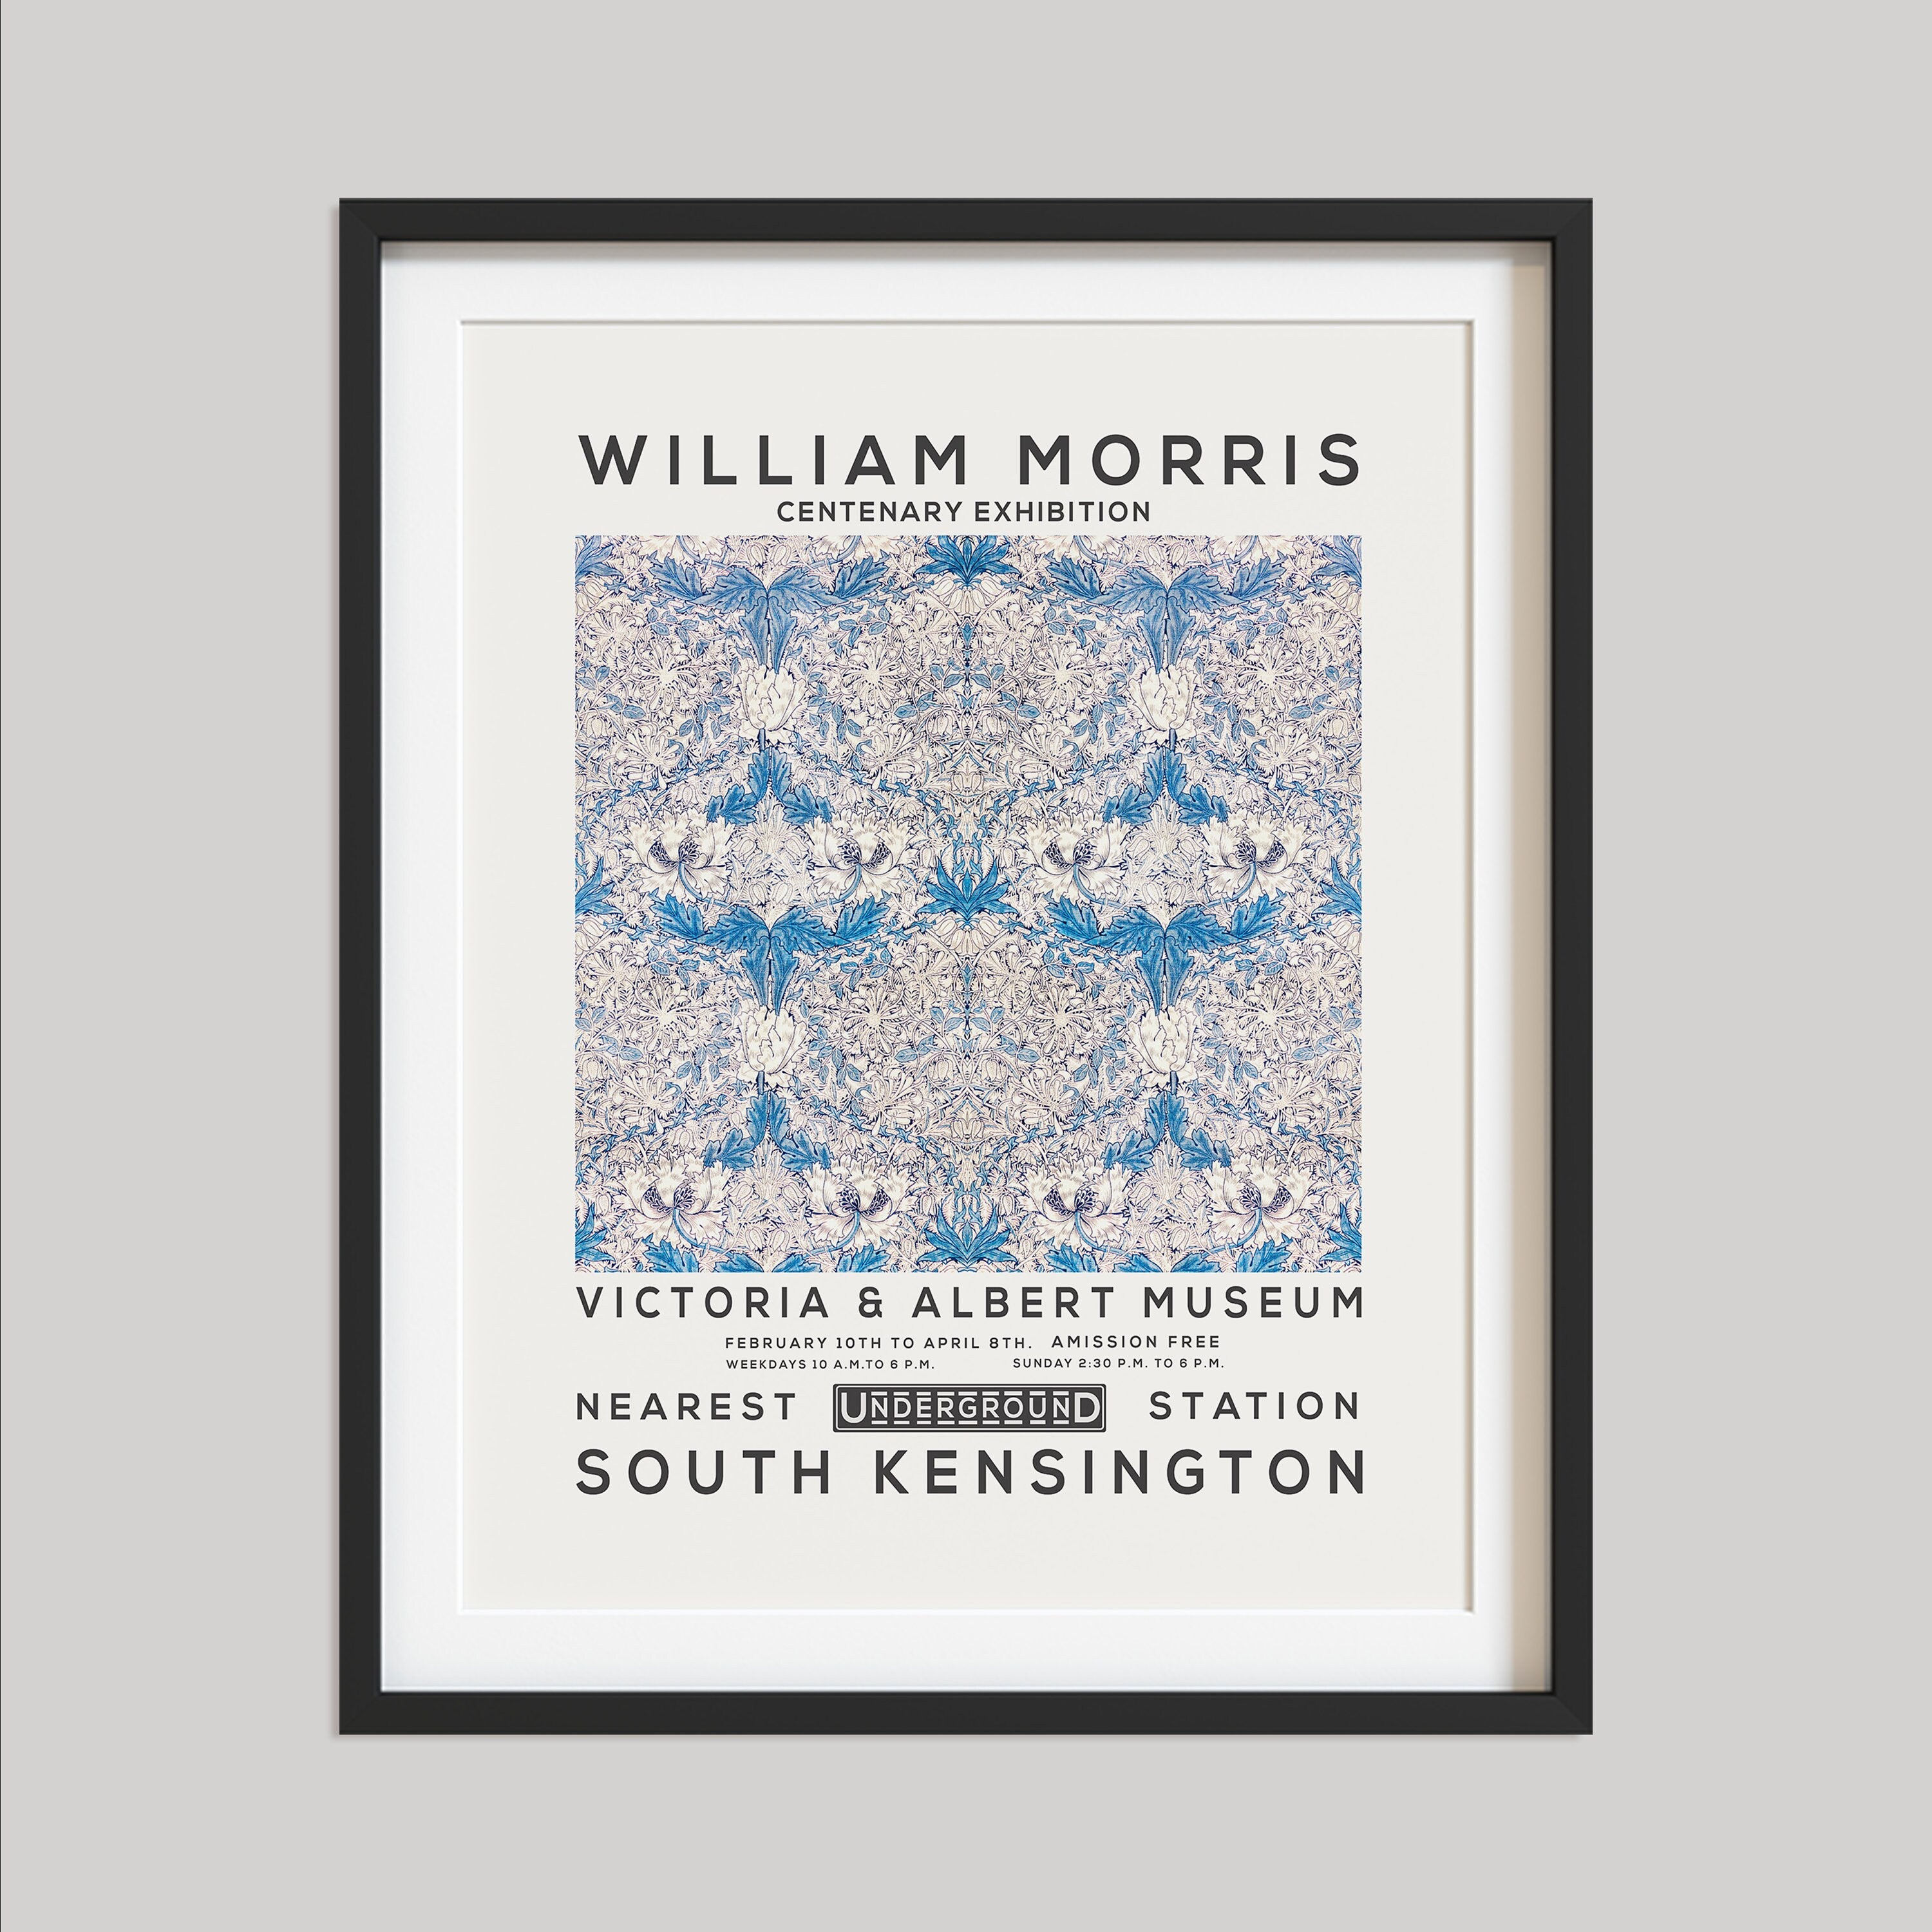 William Morris Poster, Vintage Wall Decor, Exhibition Poster, Floral Wall Art, Gallery Poster, Home Decor, Museum Poster